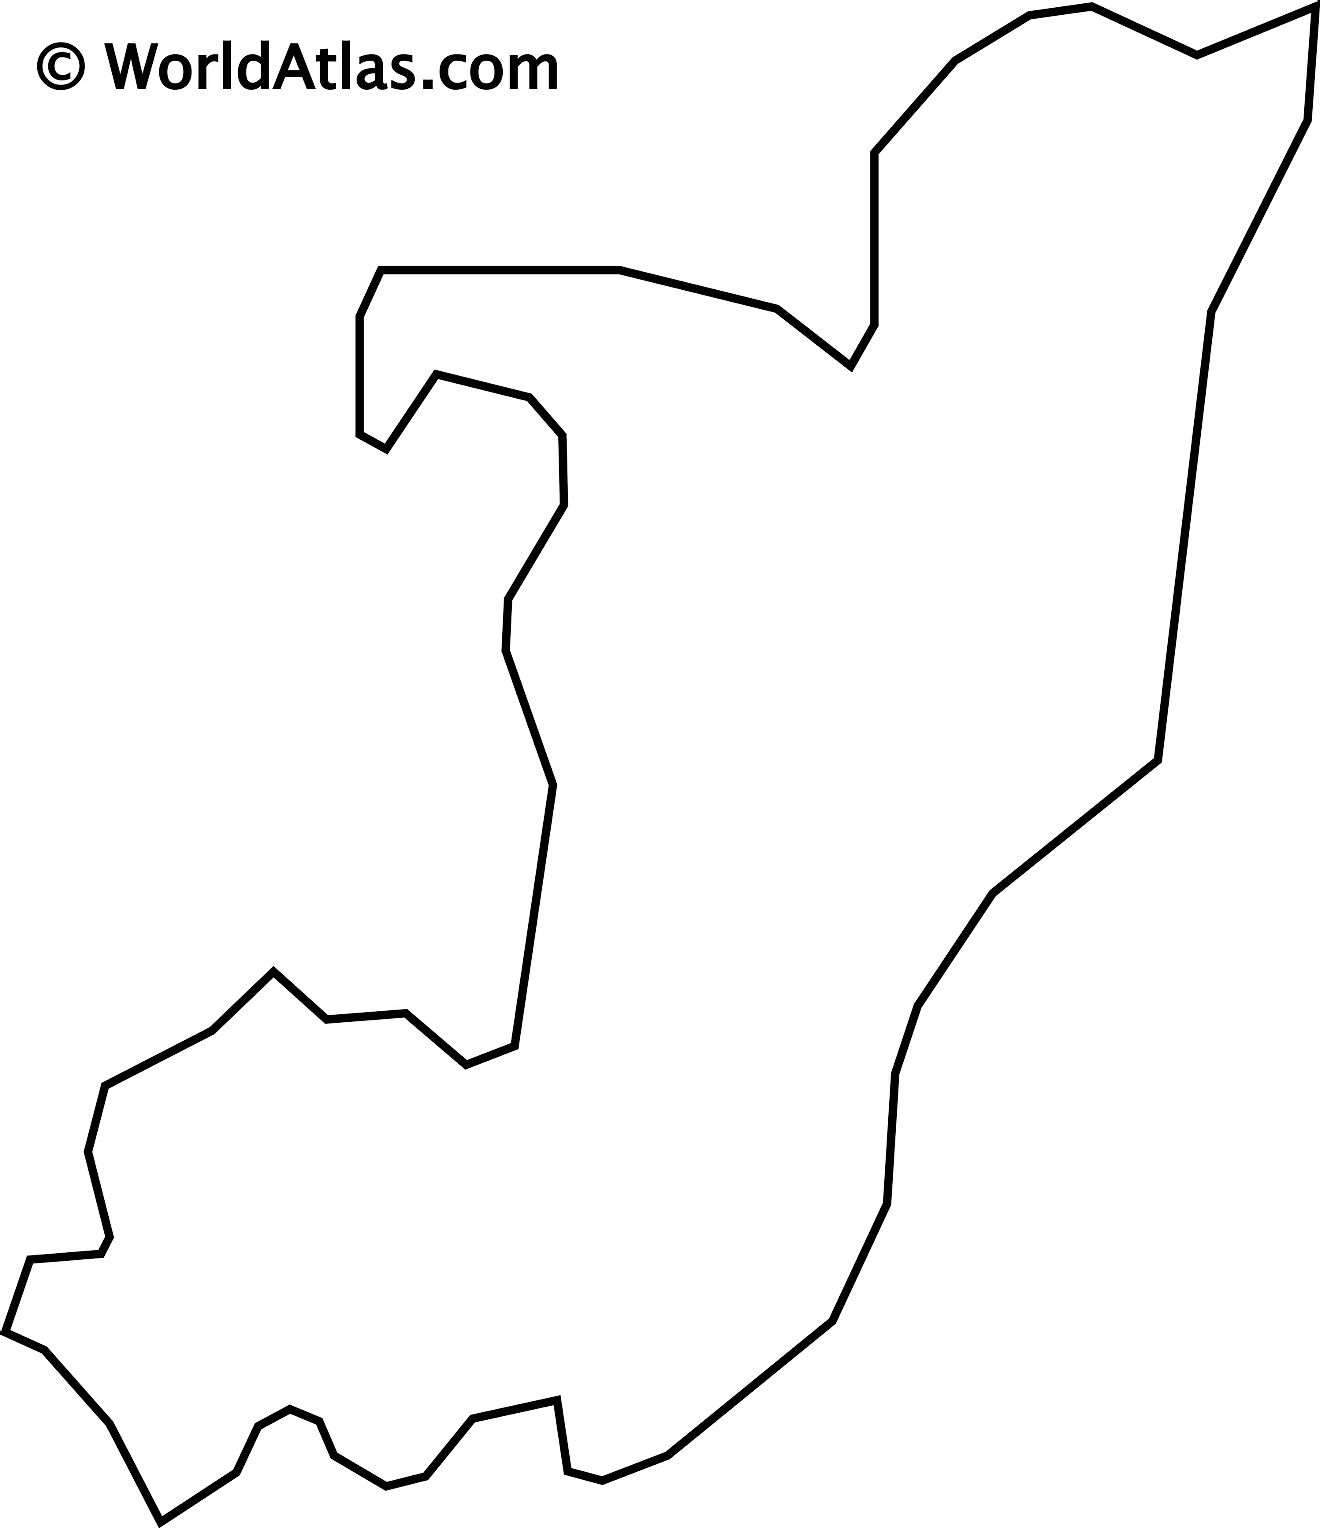 Blank outline map of Congo